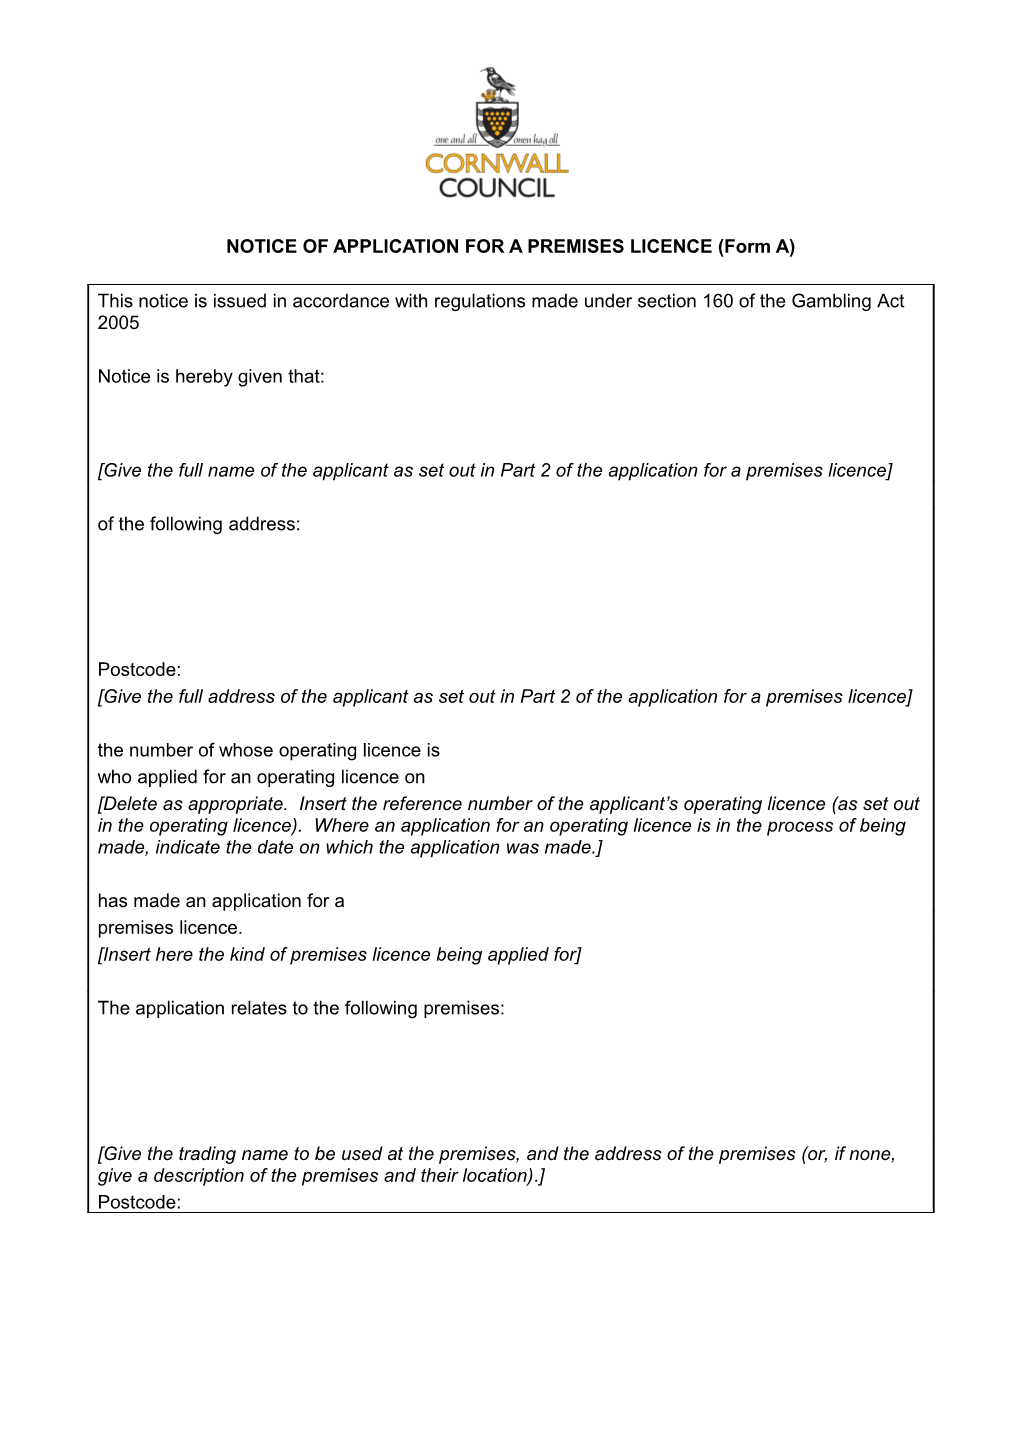 NOTICE of APPLICATION for a PREMISES LICENCE (Form A)